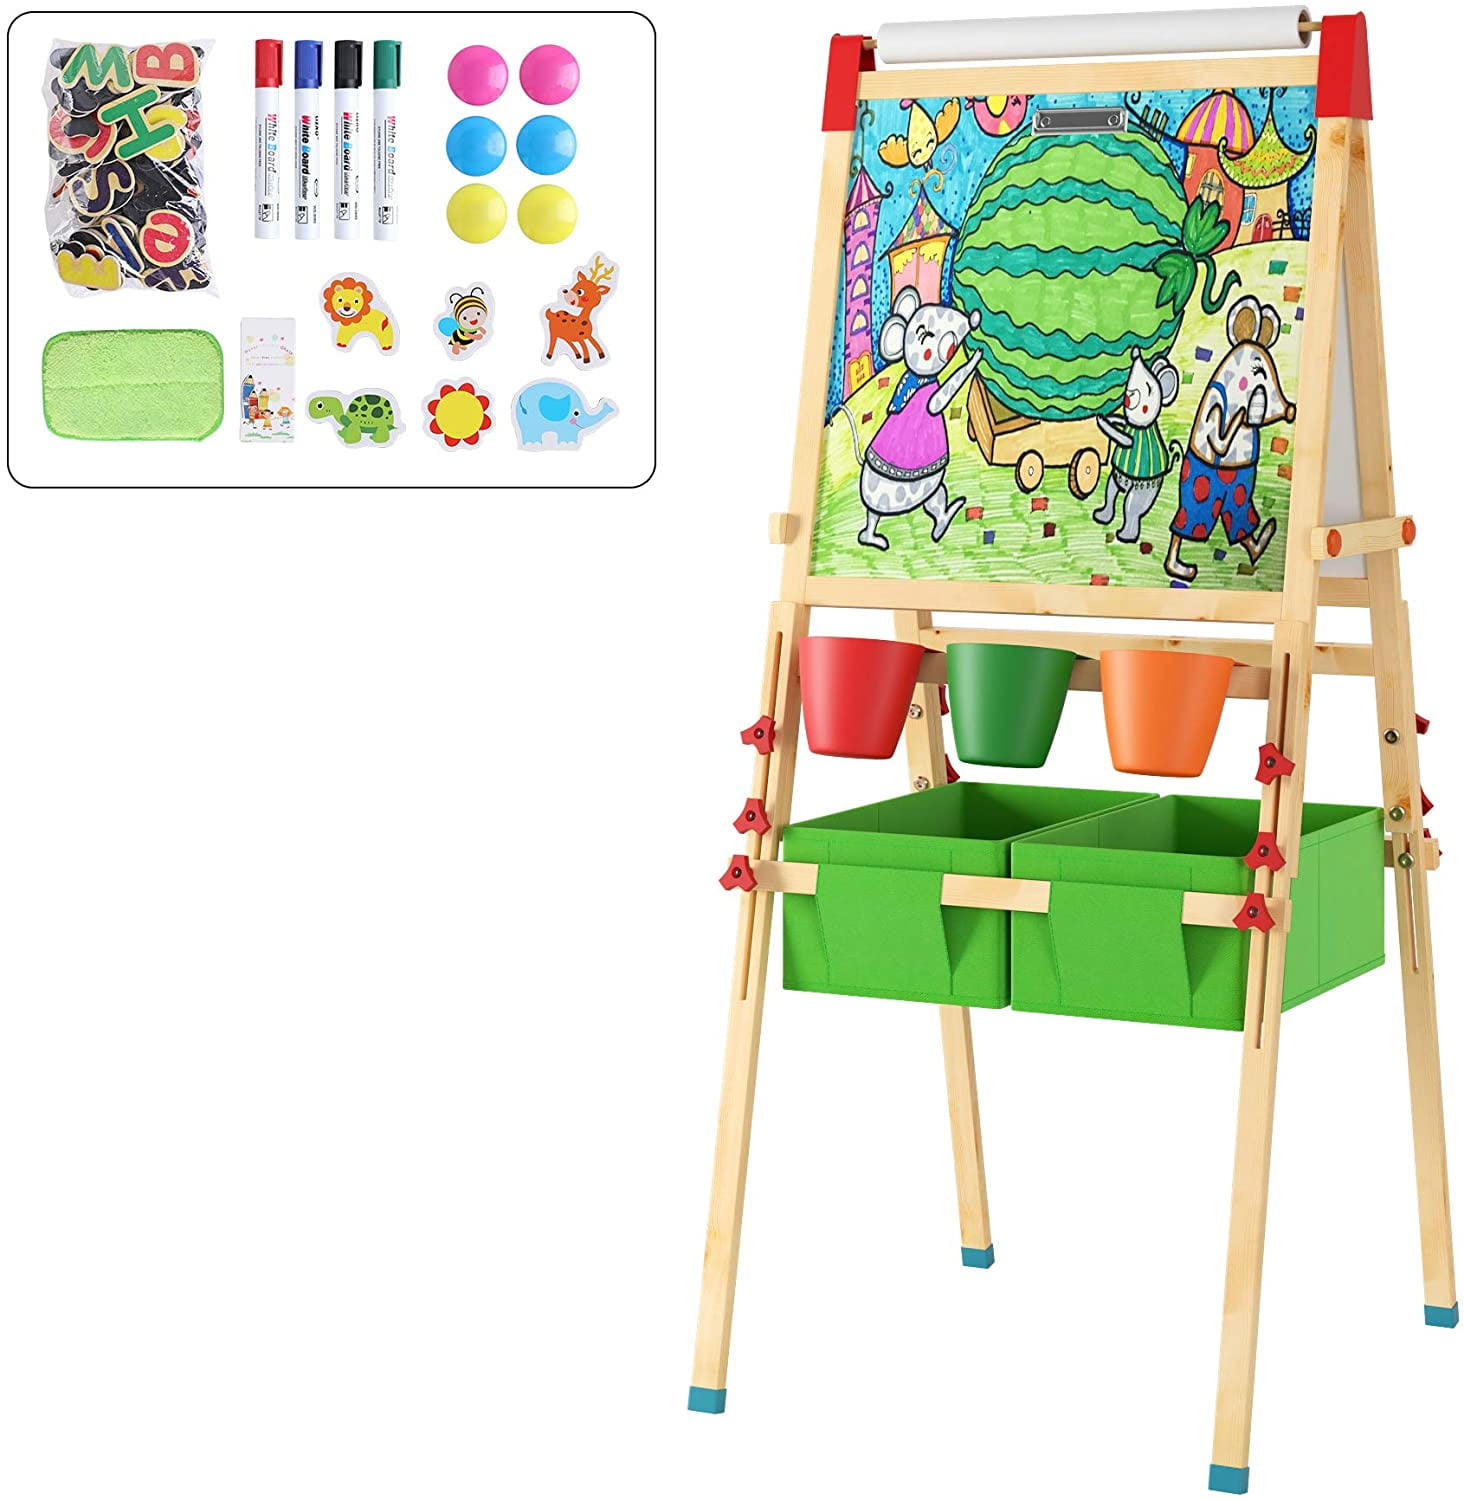 Kids Magnetic Easel Chalk White Black Drawing Board Height Adjustable Art Toy 